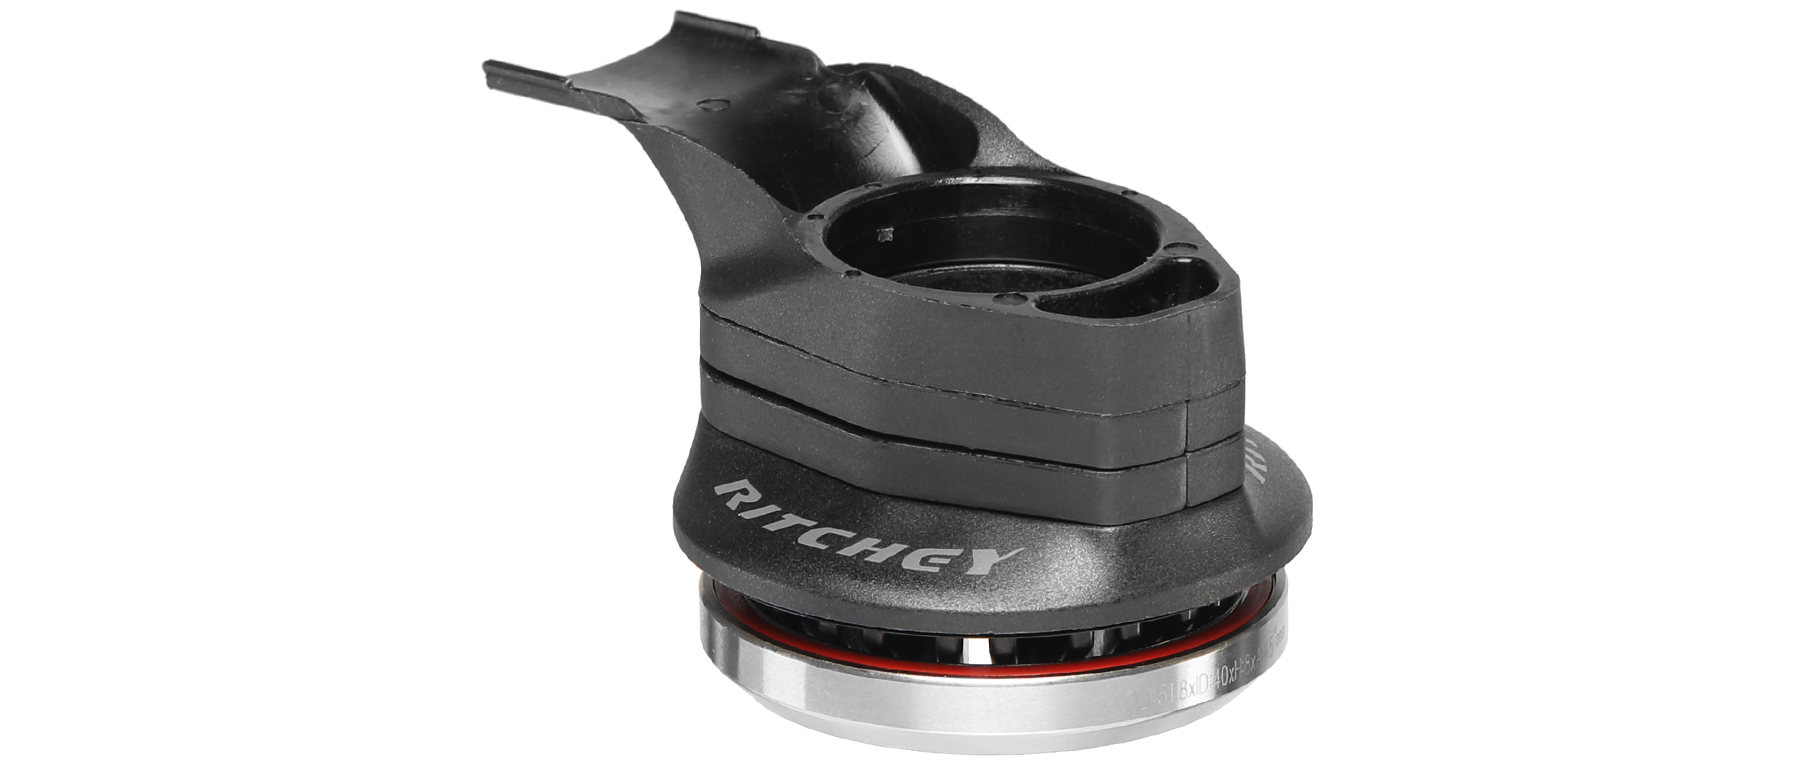 Ritchey Comp Switch Upper Headset Assembly IS52/28.6